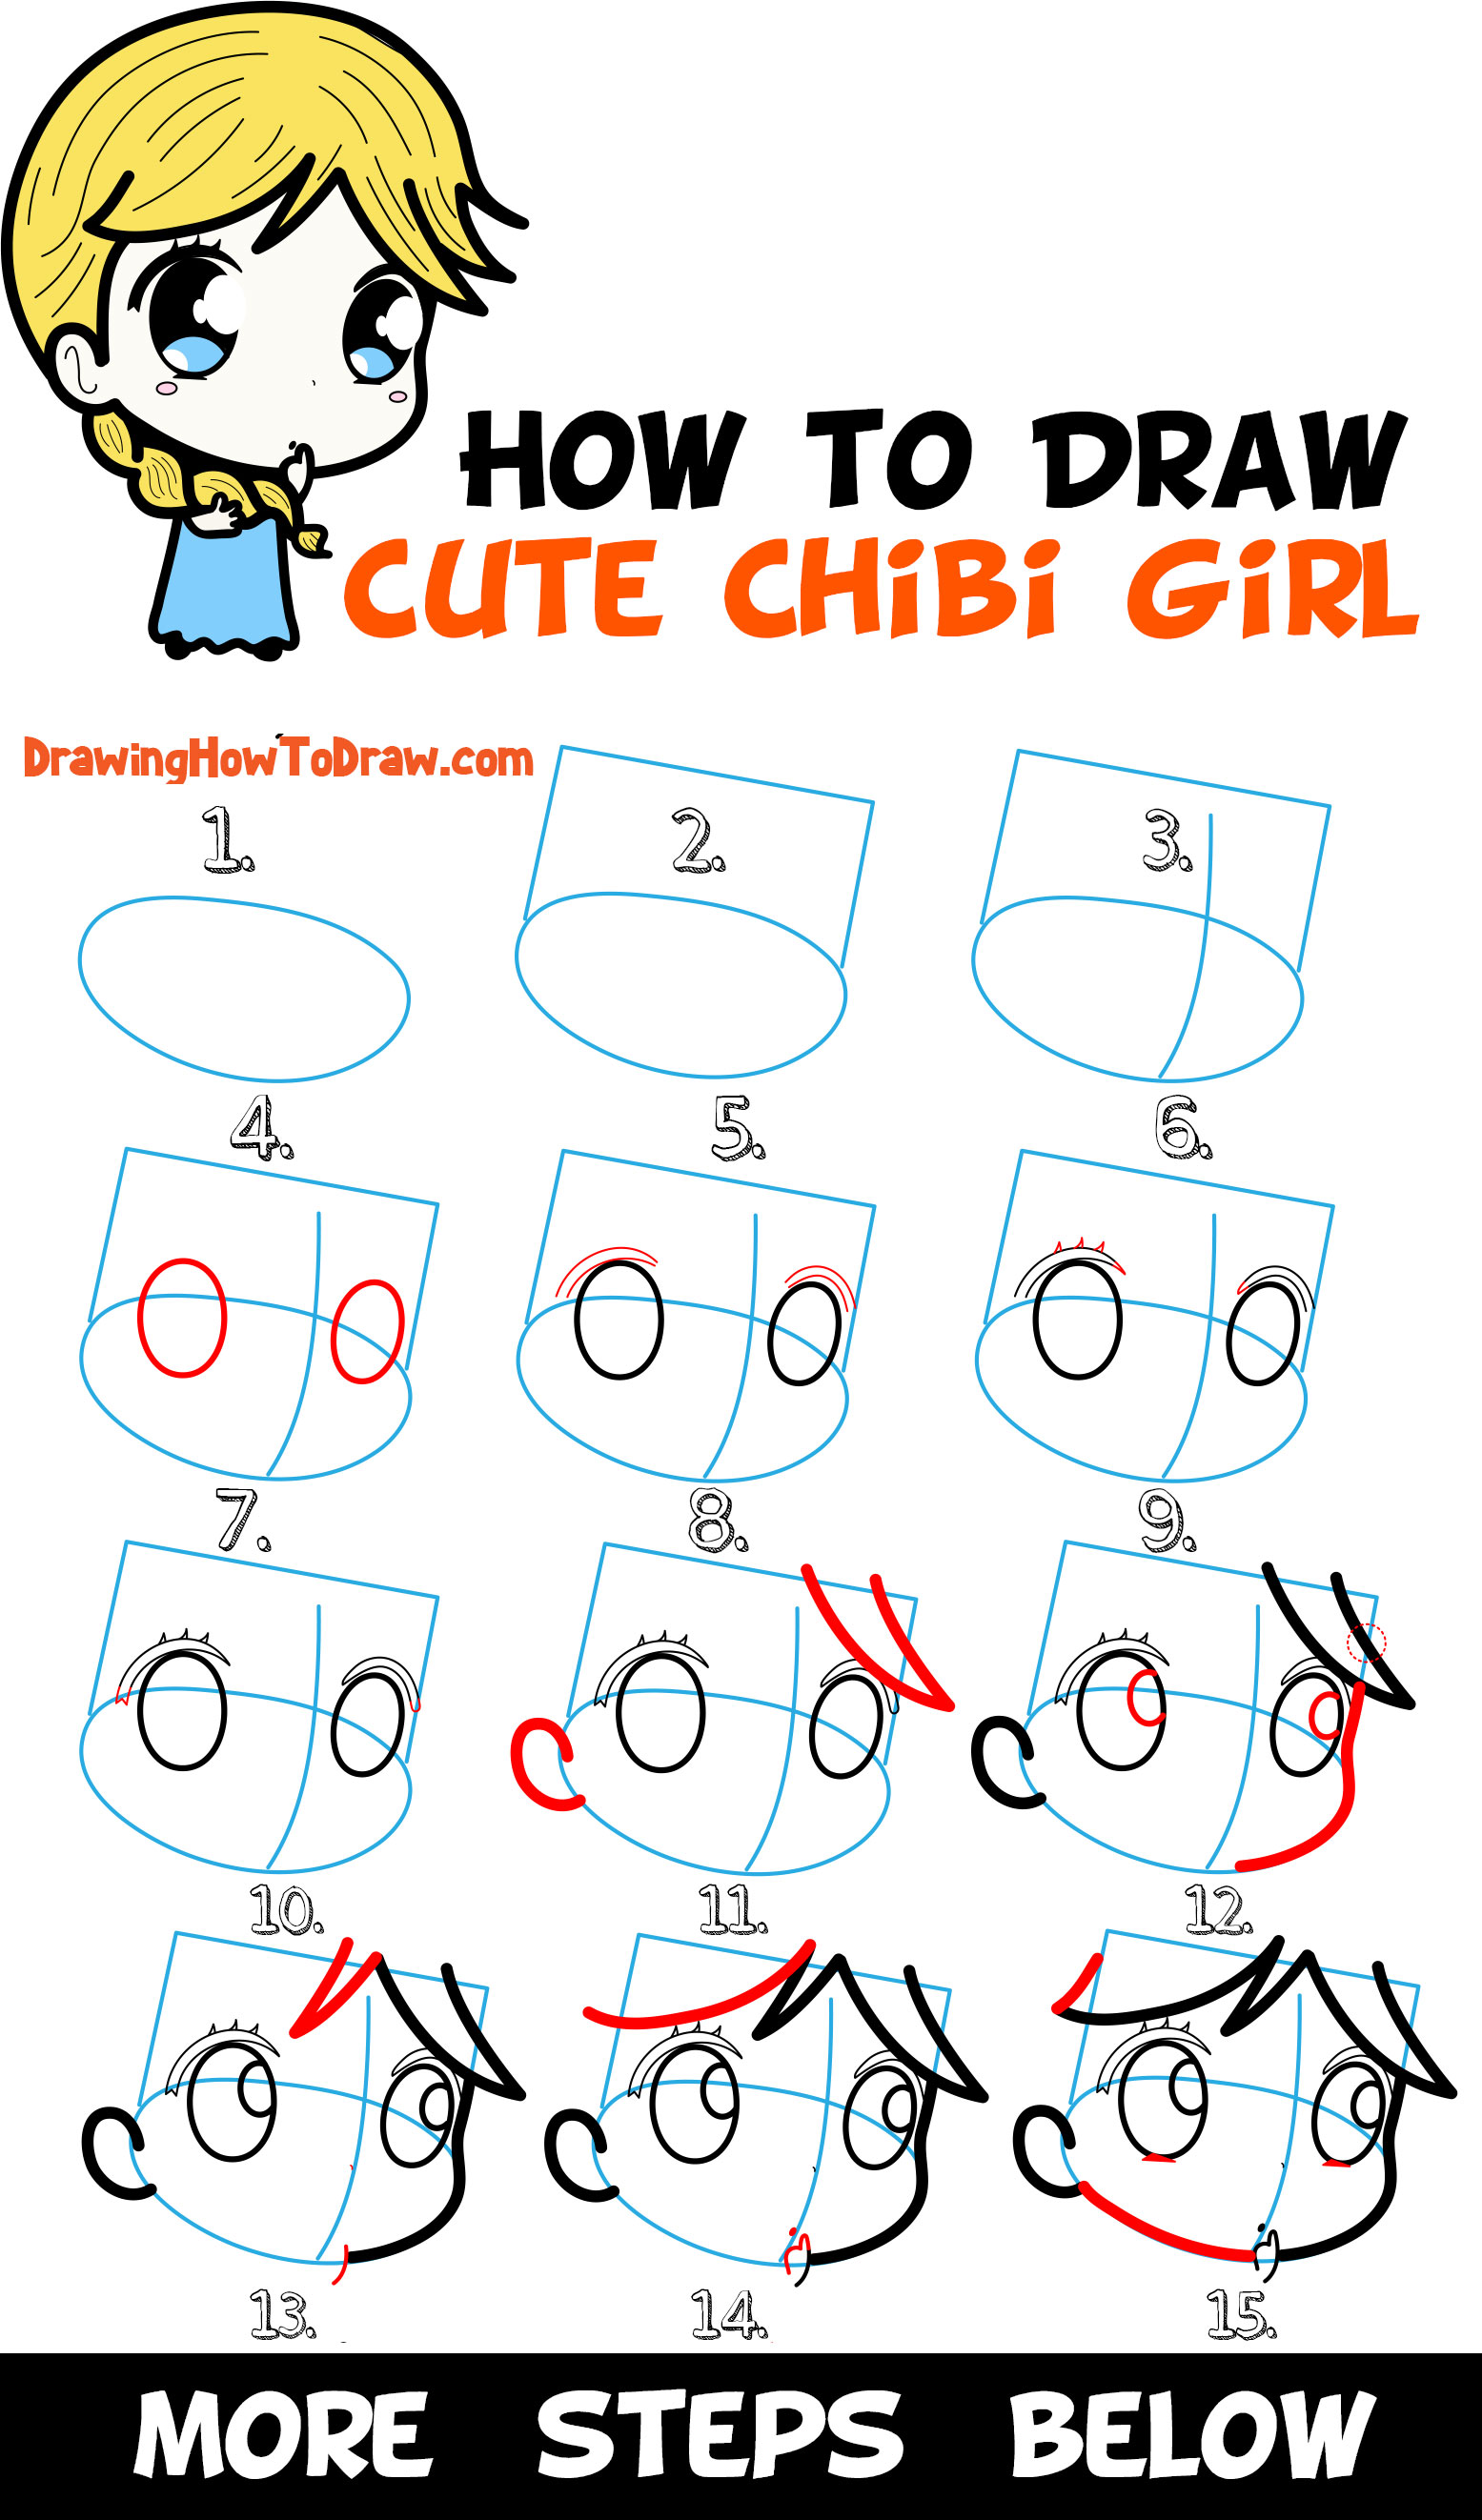 how to draw chibi girl step by step for beginners